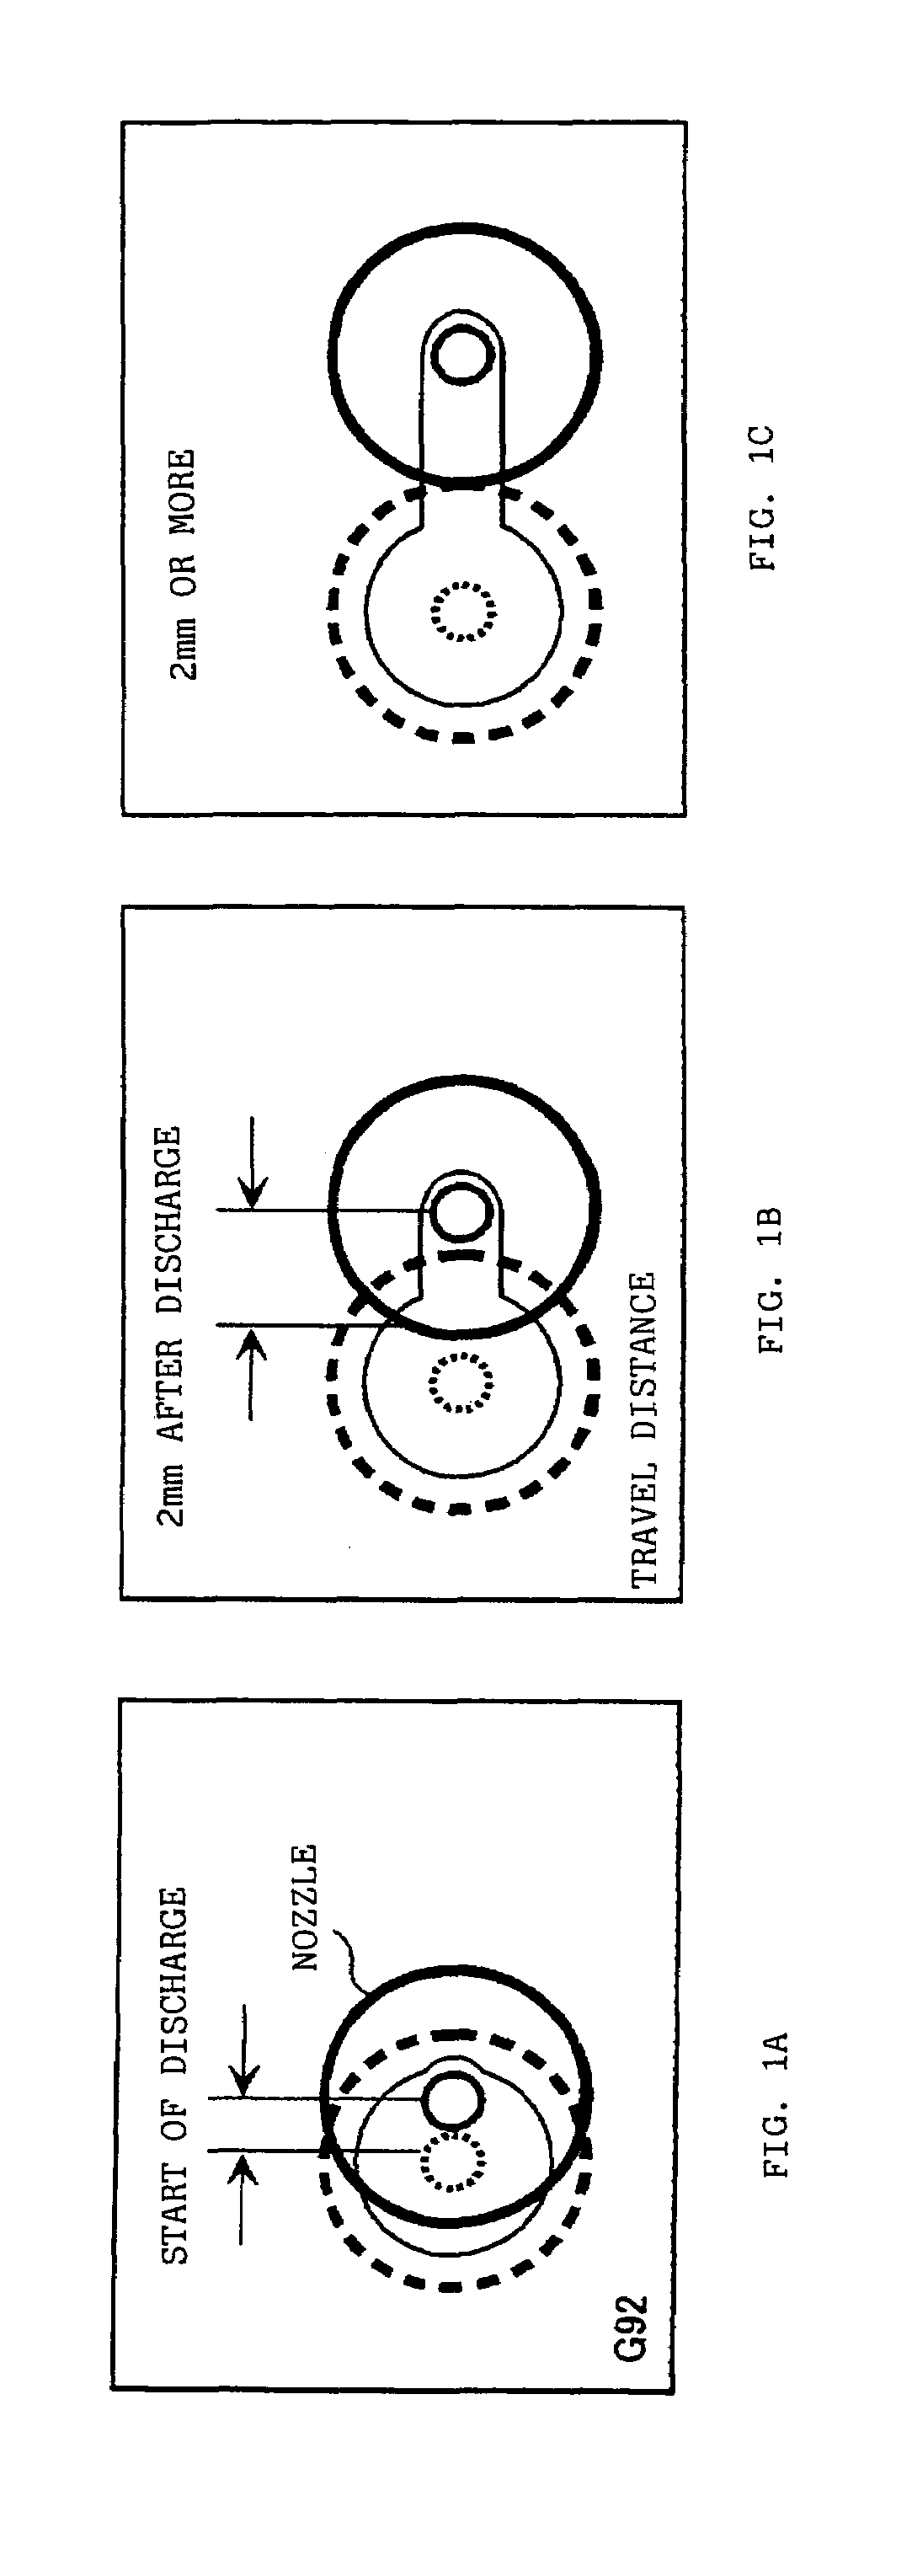 Controller for a wire electrical discharge machine